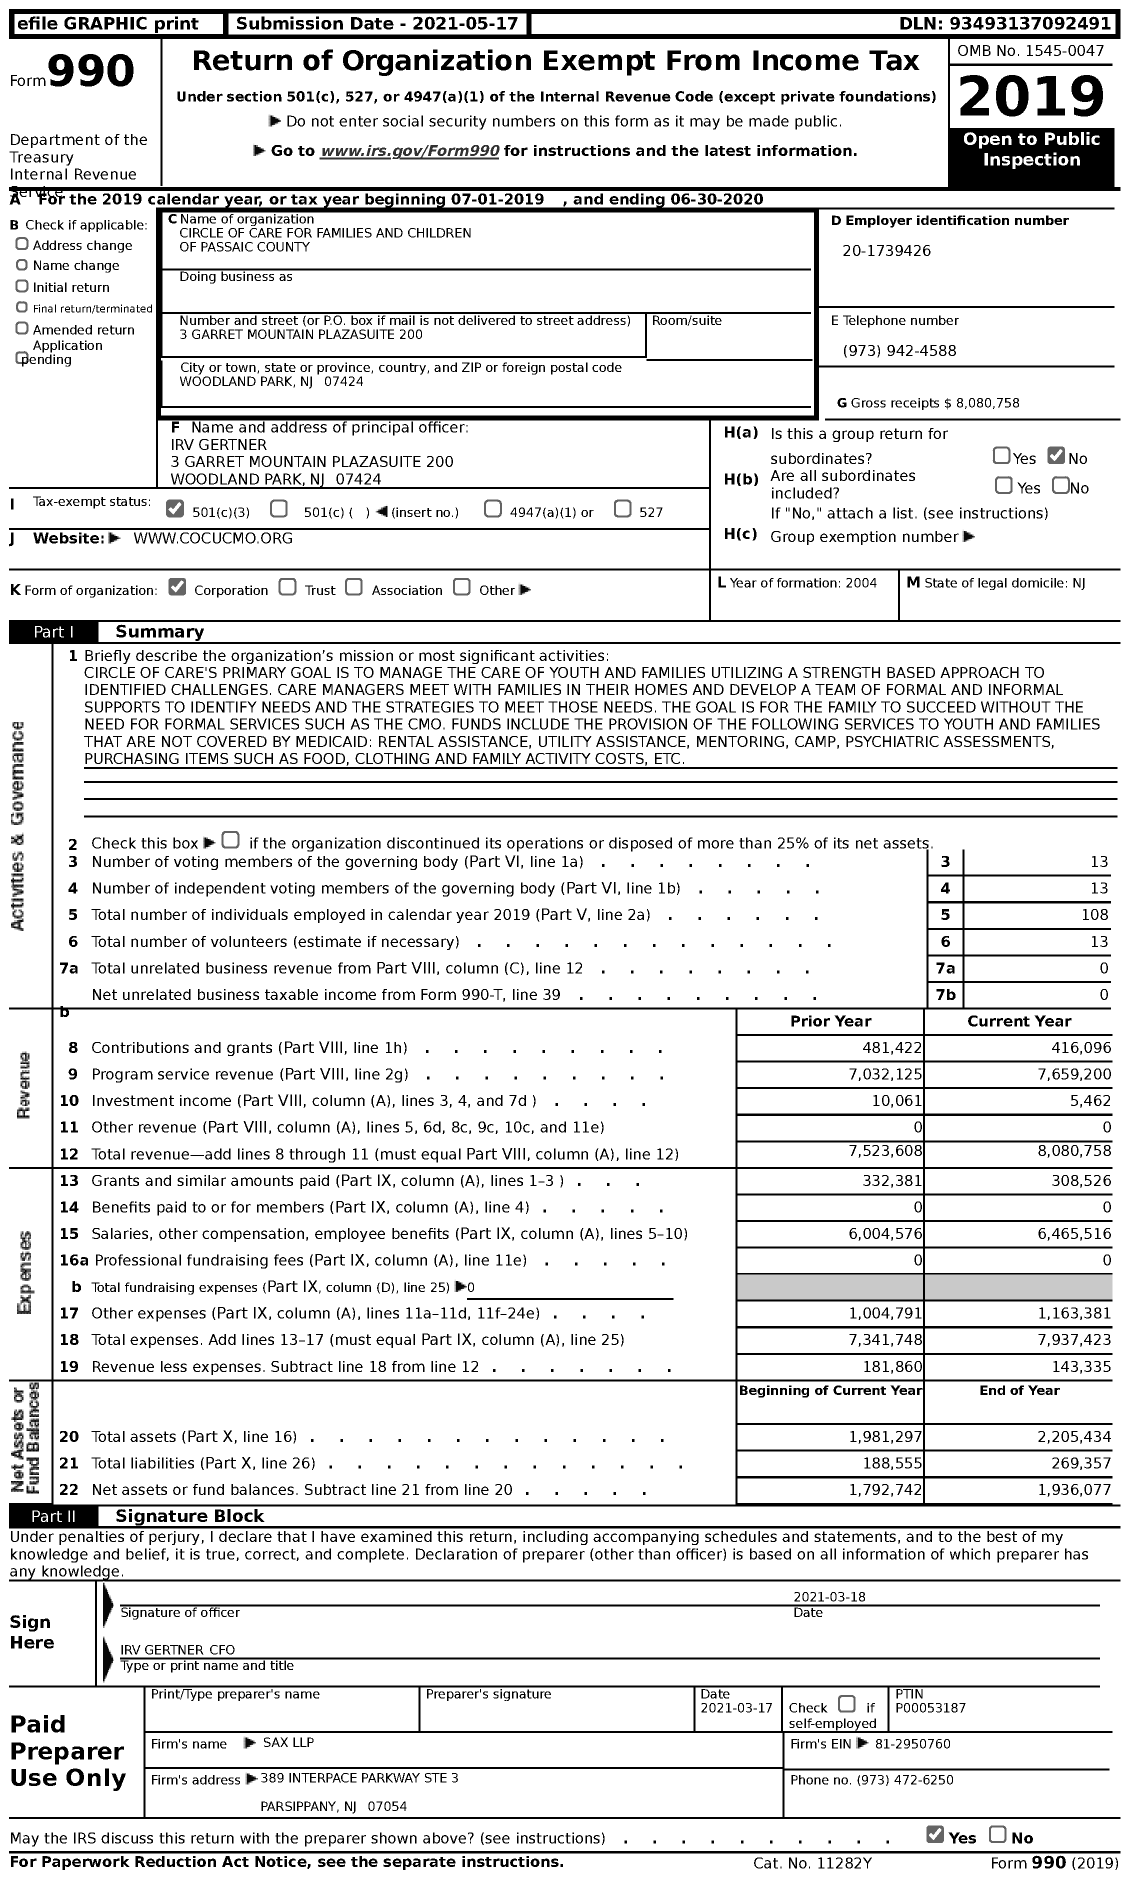 Image of first page of 2019 Form 990 for Circle of Care for Families and Children of Passaic County